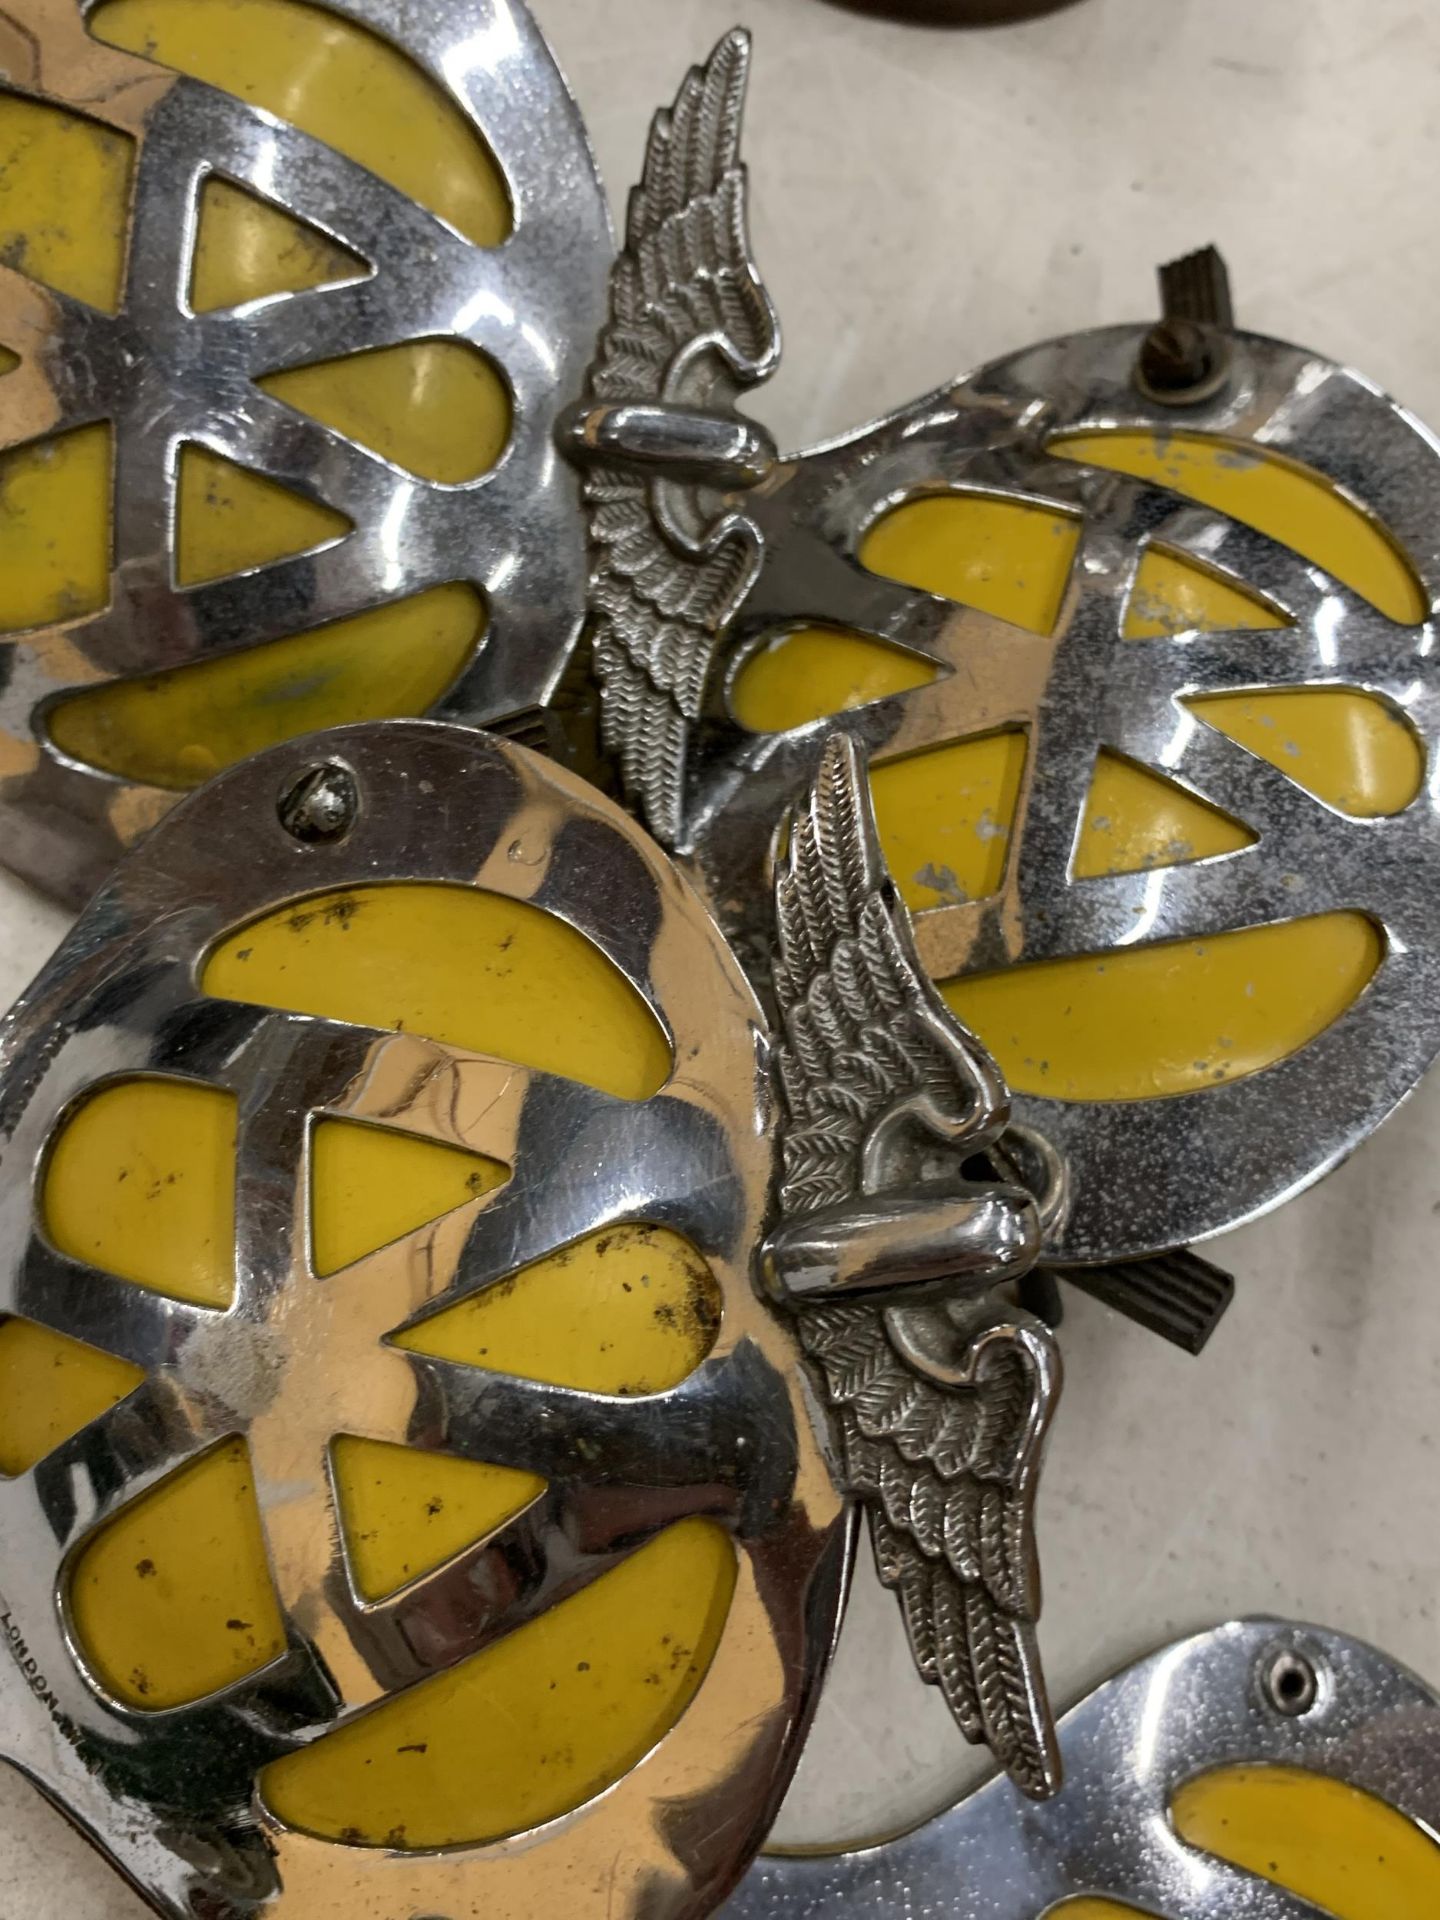 AQUANTITY OF VINTAGE CAR BADGES TO INCLUDE THE A A AND THE CARAVAN CLUB - Image 5 of 6